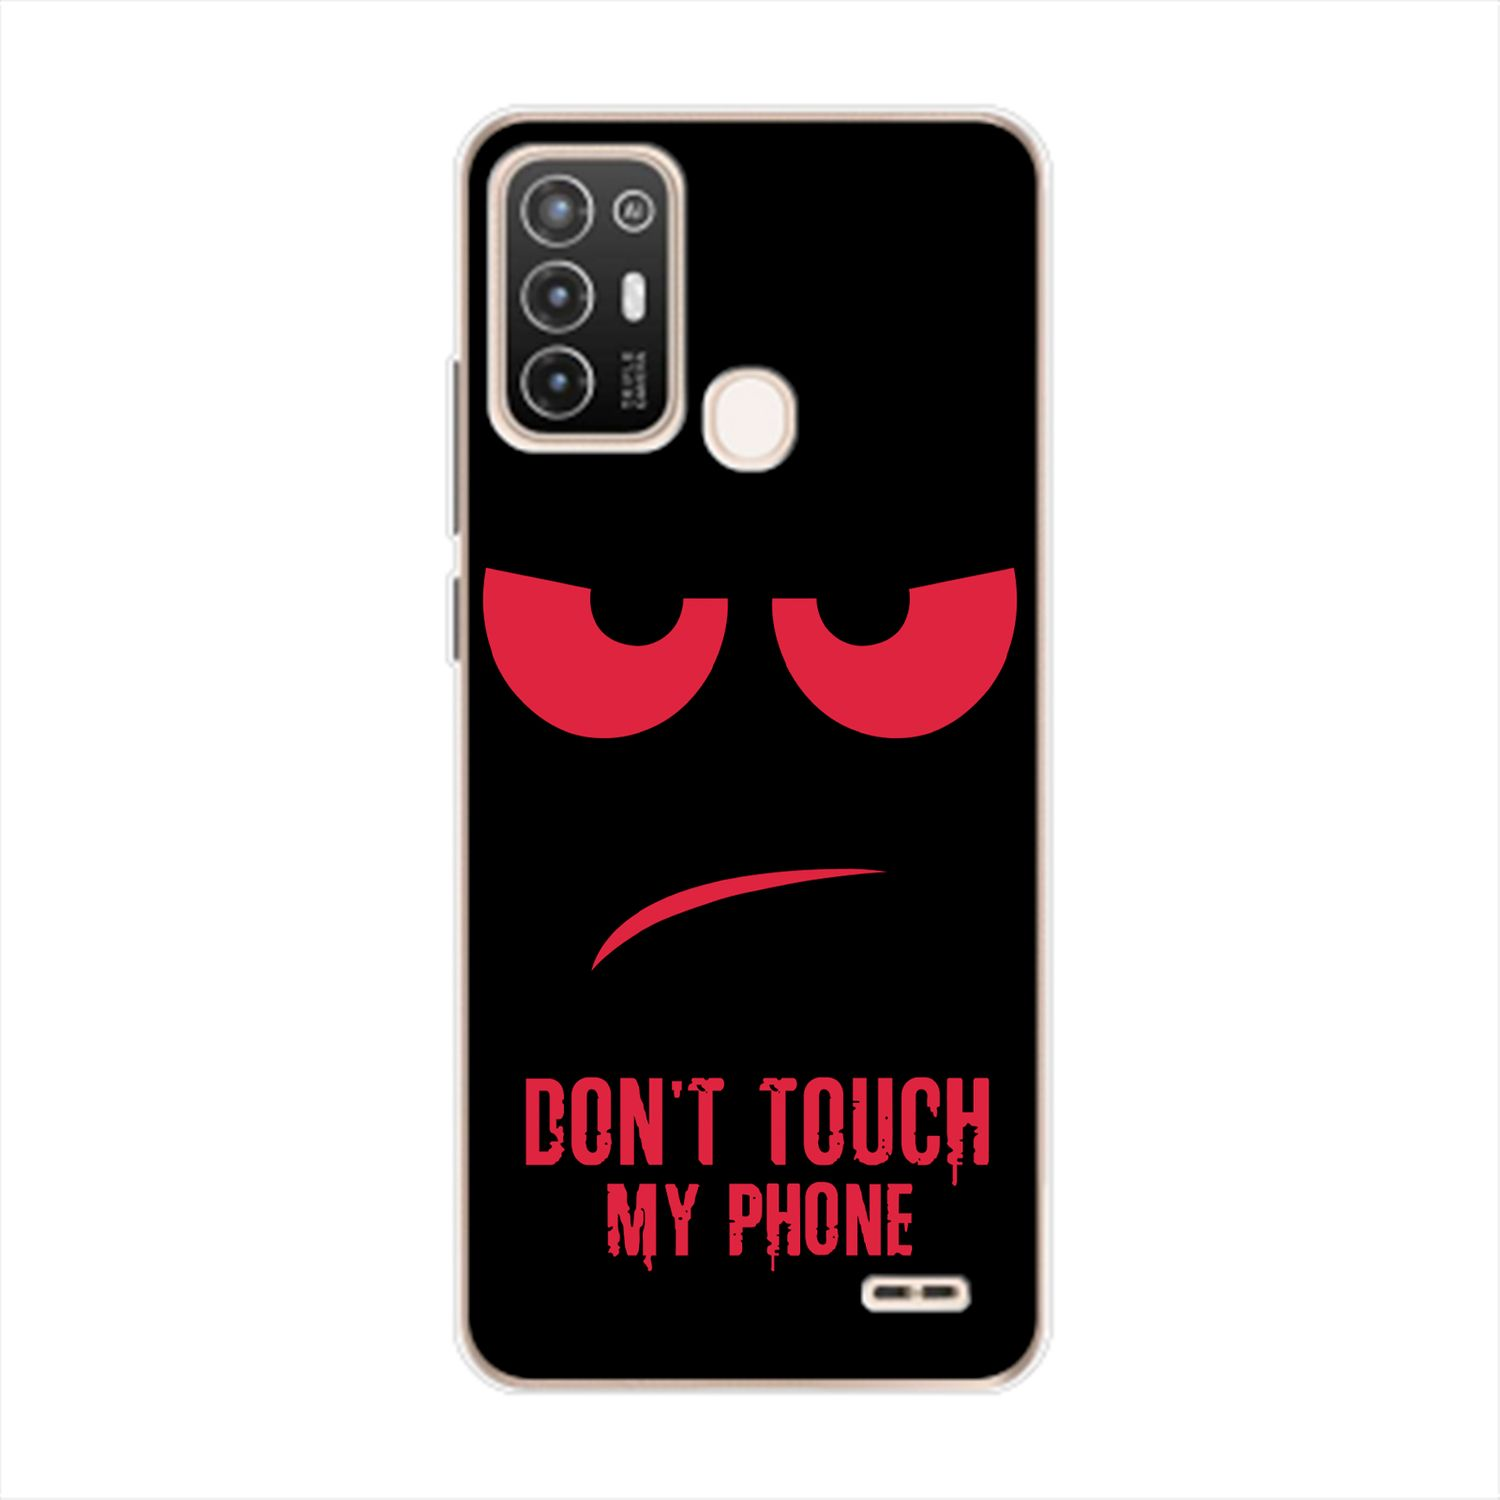 KÖNIG DESIGN Case, Backcover, ZTE, Dont Phone Blade A52, Touch My Rot